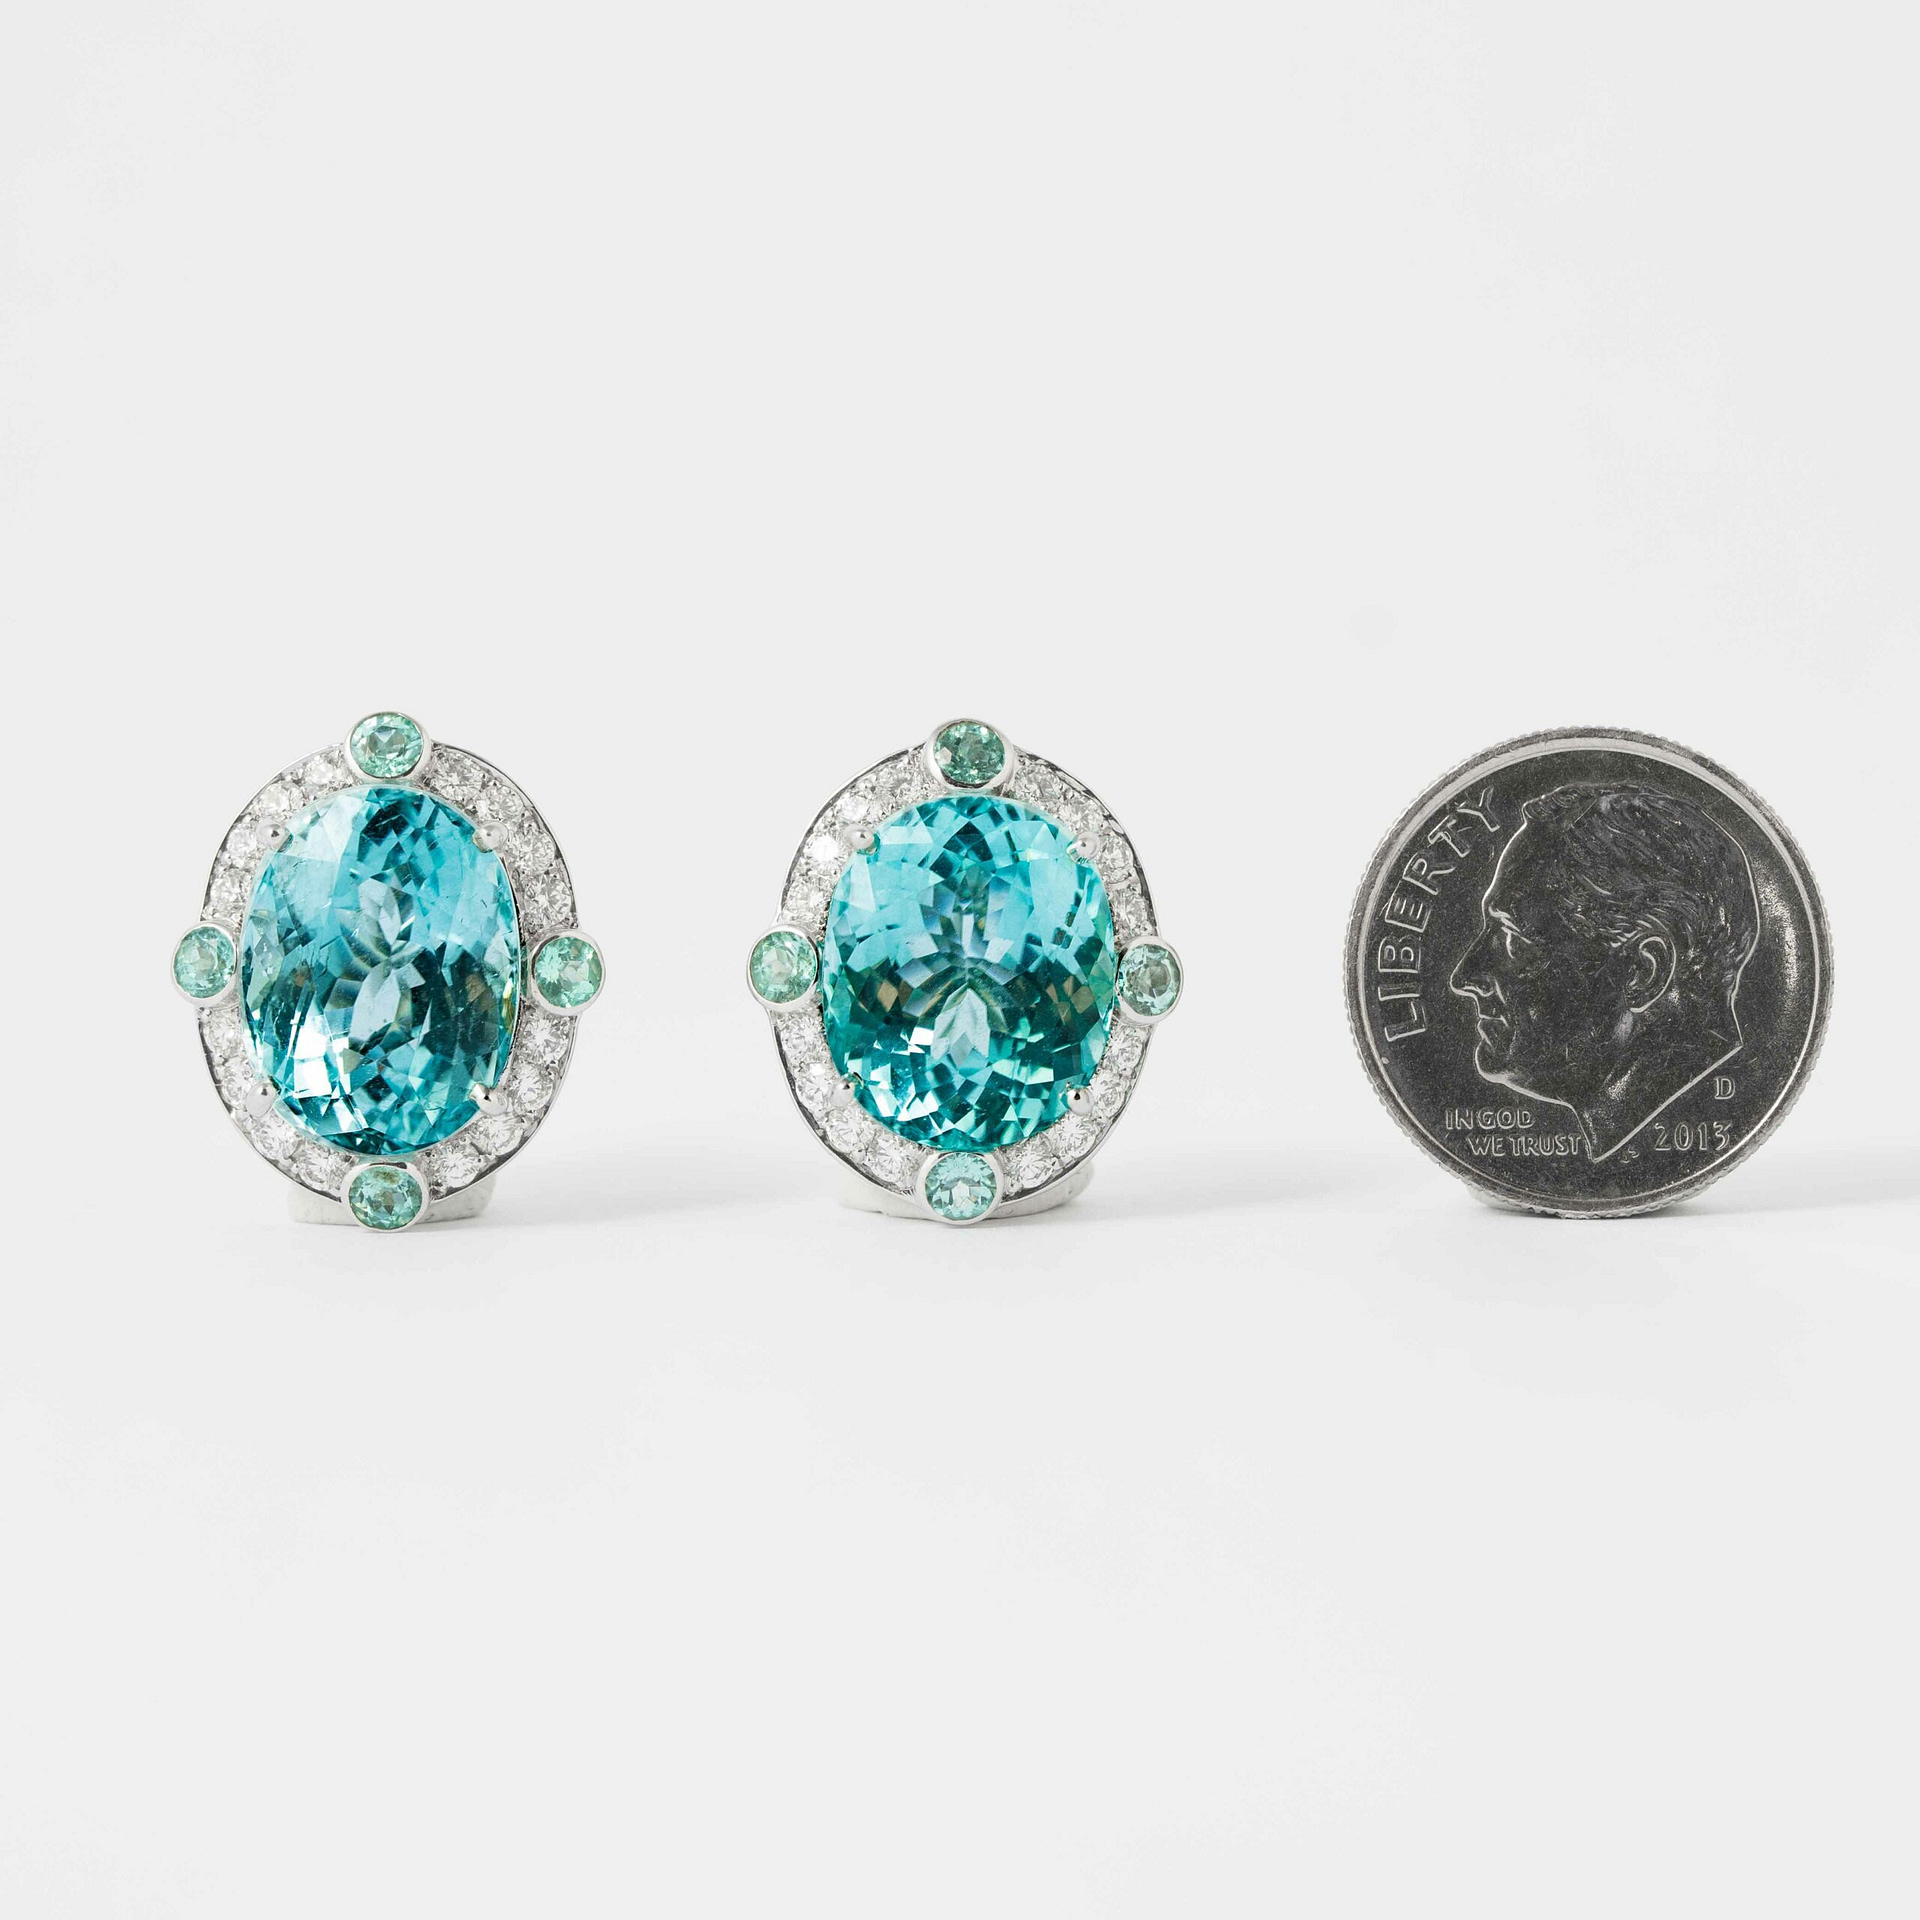 13.89 Carat Oval Paraiba Tourmaline Cluster Earrings (Gia & Agl Certified, White Gold)